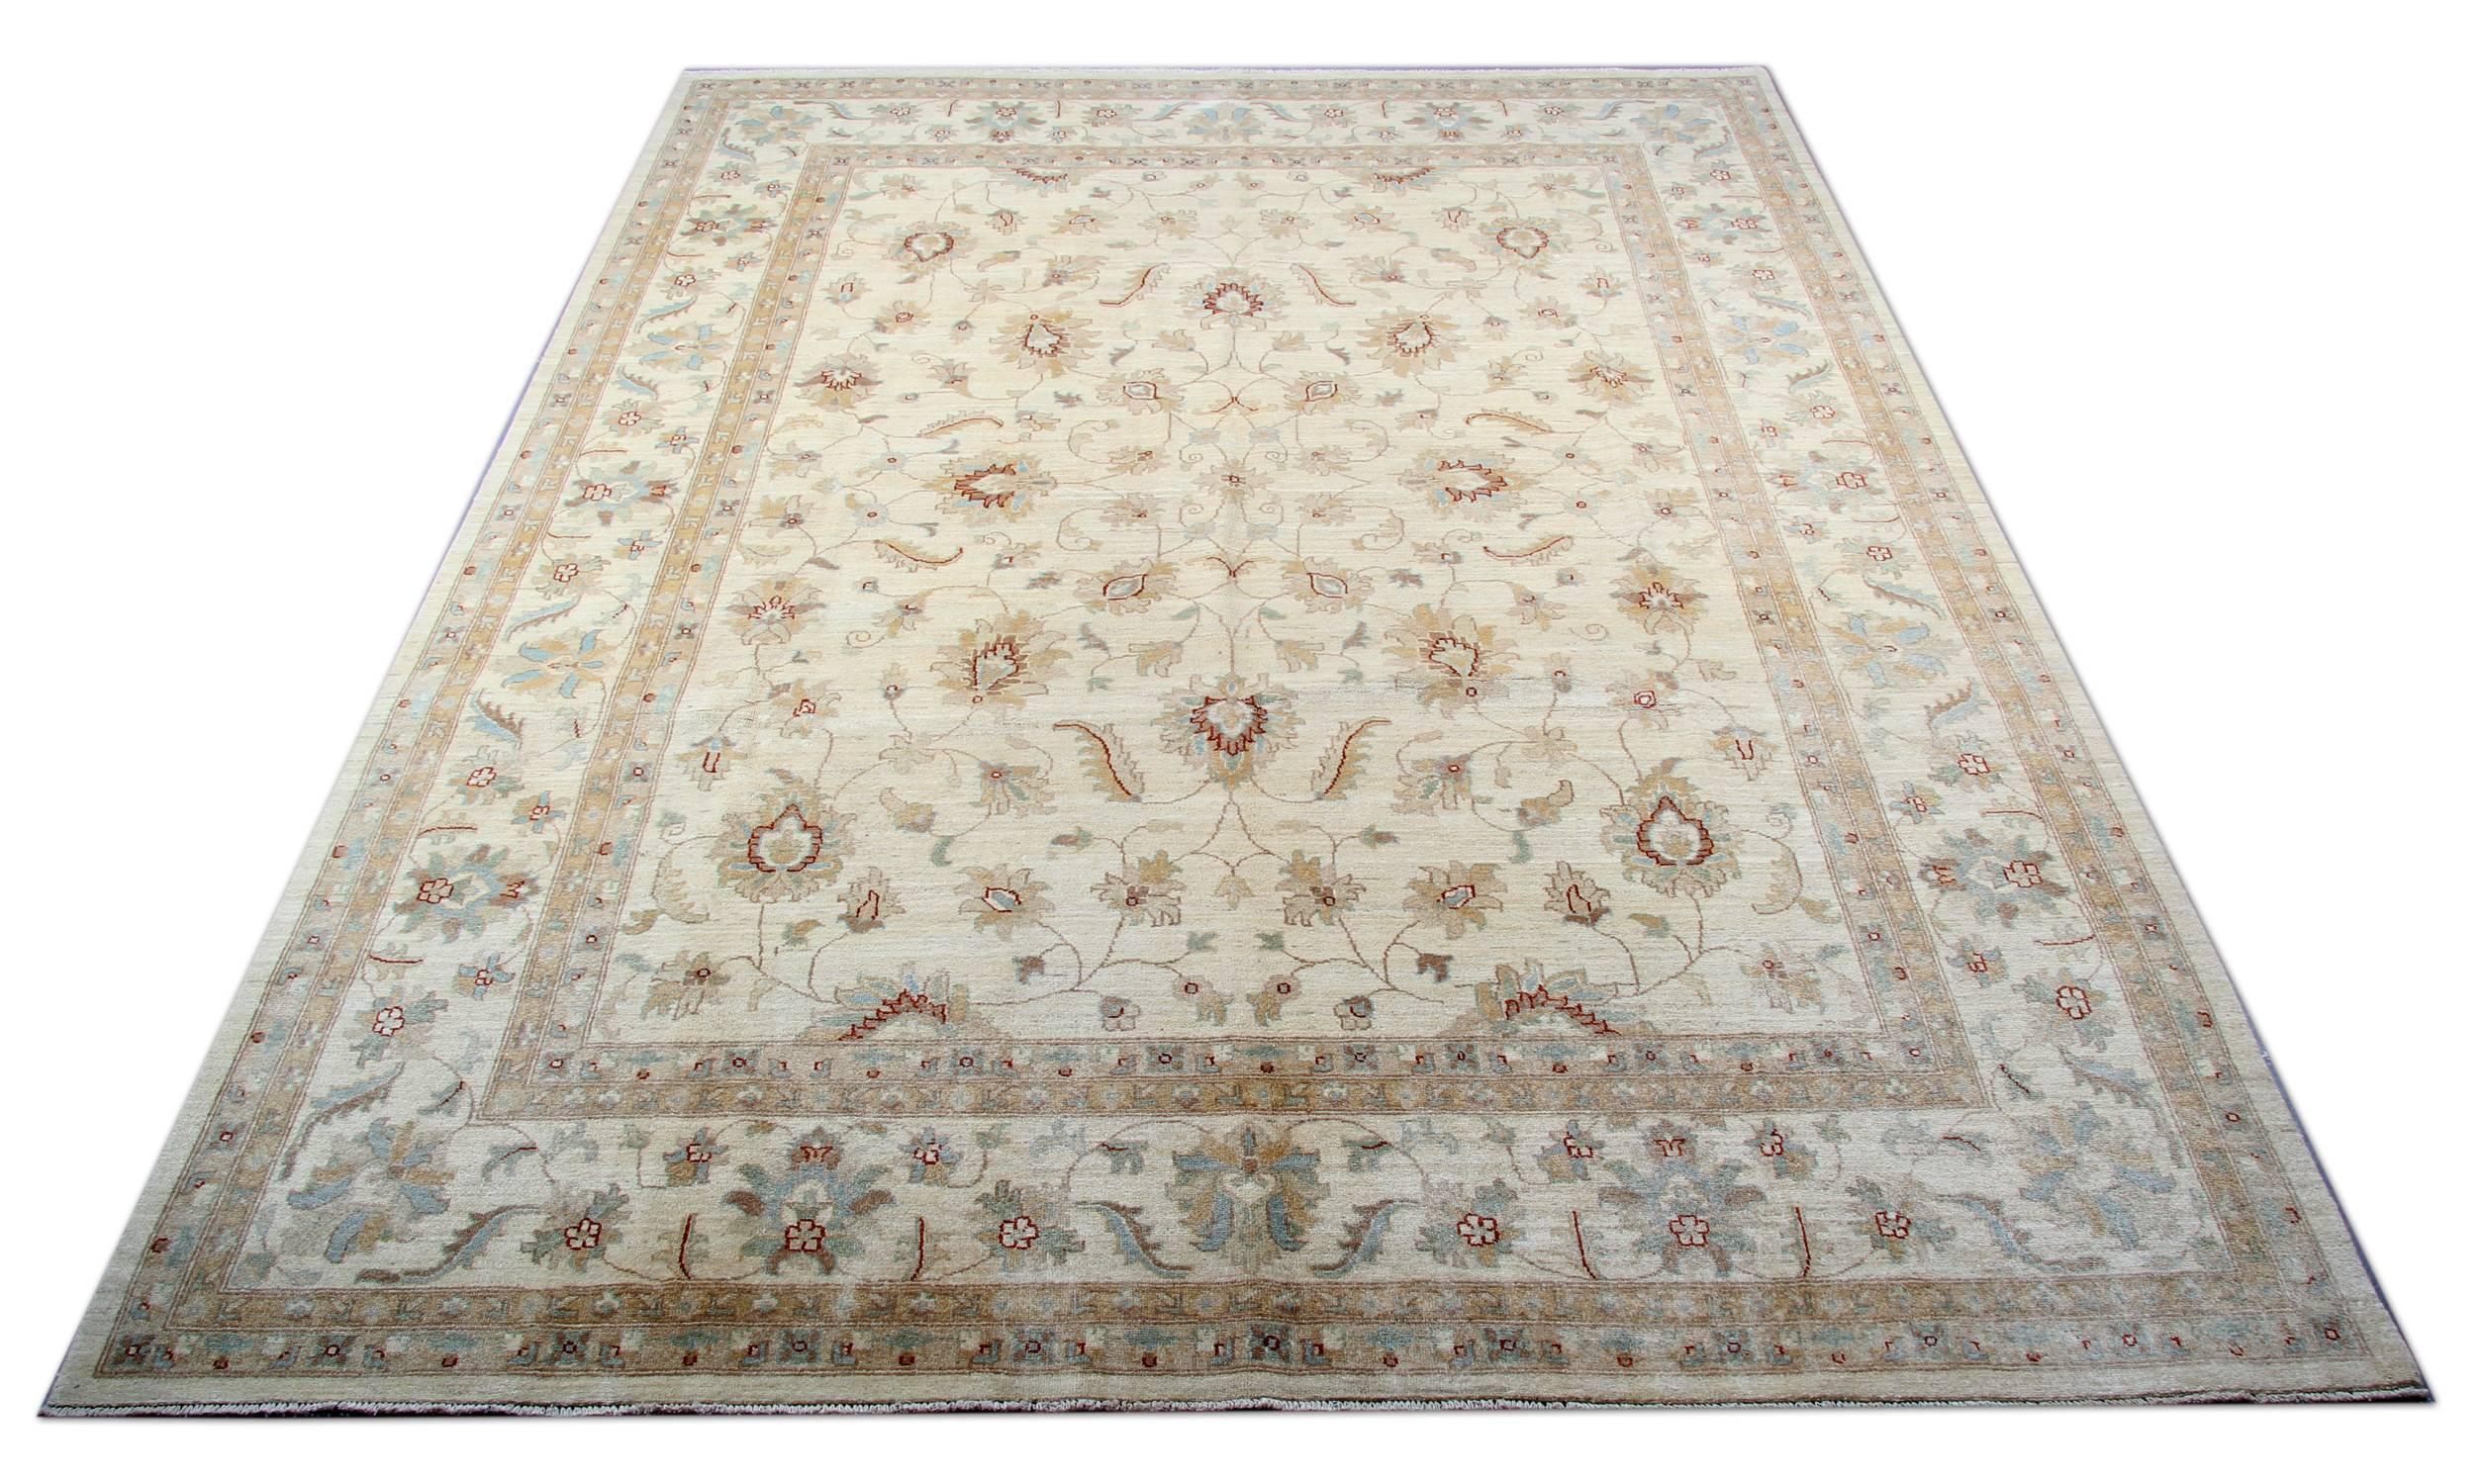 This washable Cream rug is a Ziegler Sultanabad rug made on our looms by our master weavers in Afghanistan. It is handmade Carpet with all natural veg dyes all handspun wool. The large-scale design makes Sultanabad regarded as the most appealing to